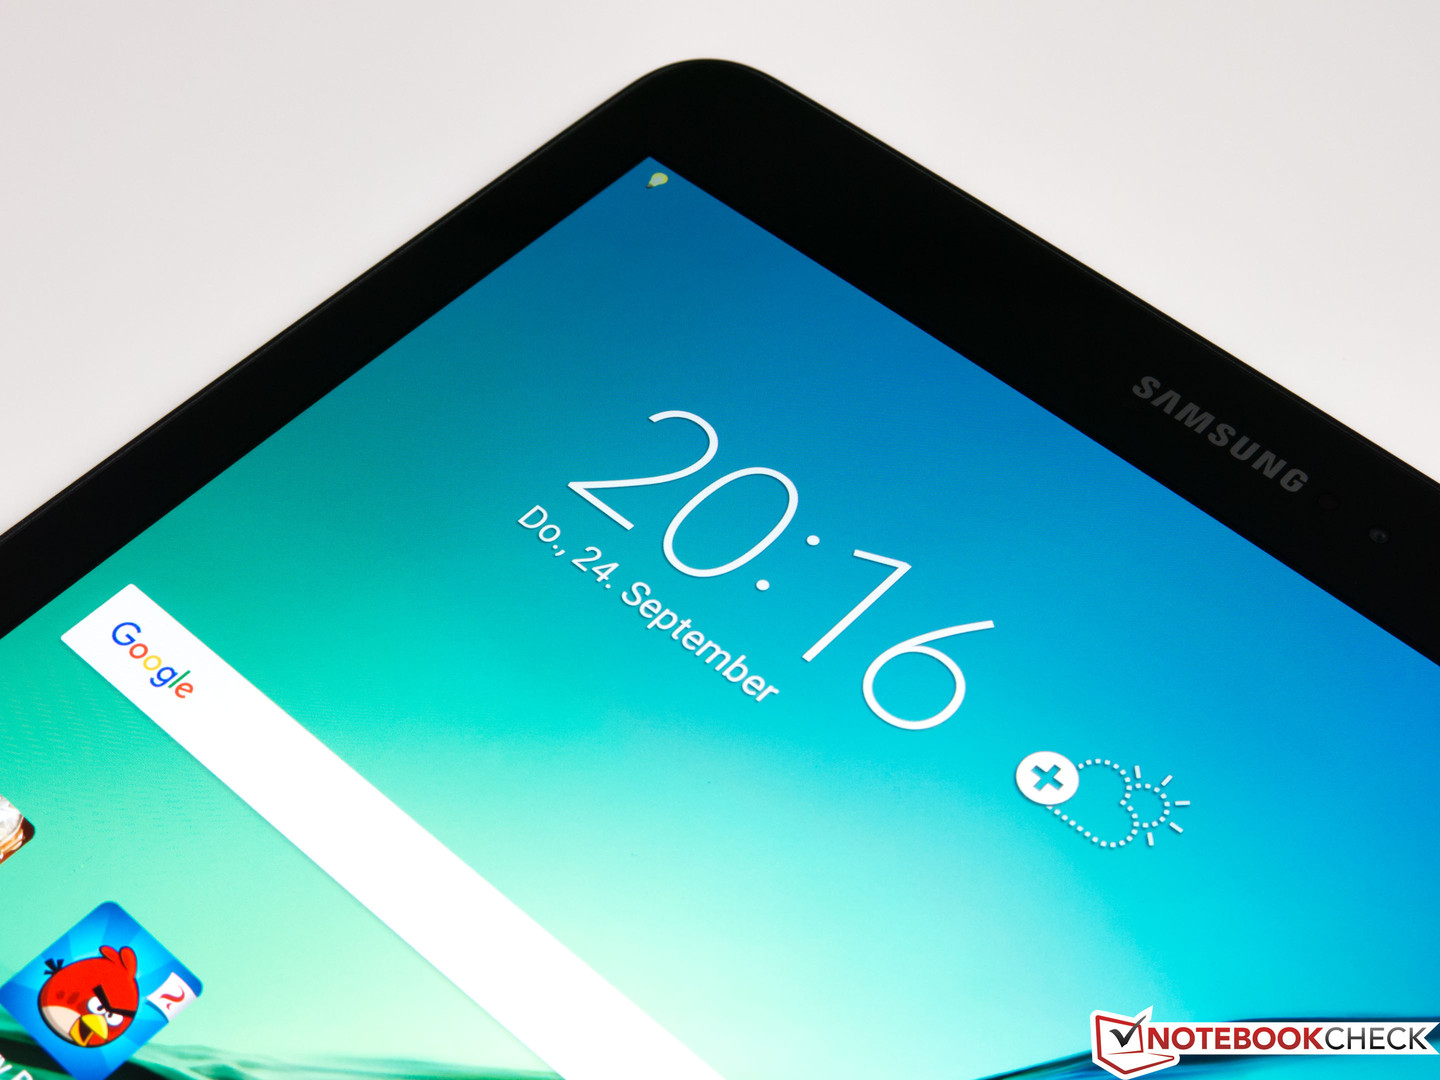 Samsung Galaxy Tab S2 9.7 LTE Tablet Review - NotebookCheck.net Reviews